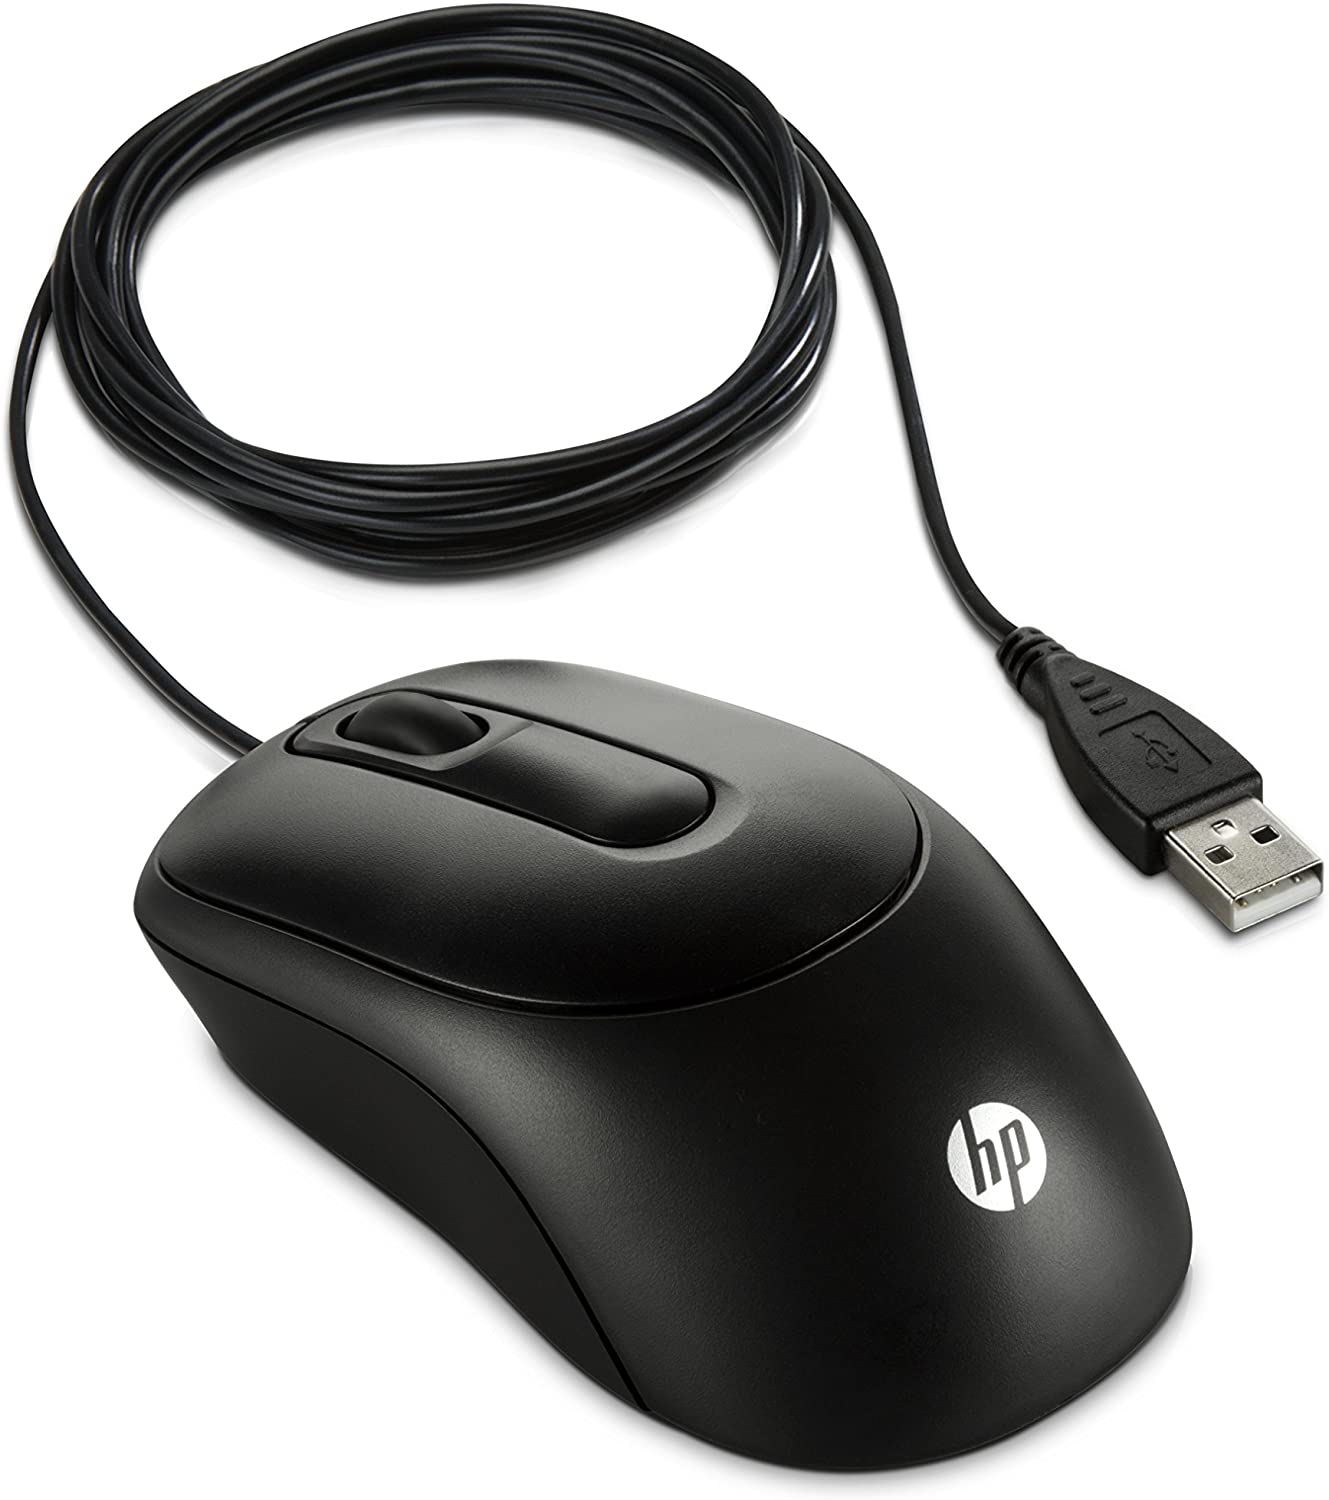 HP MOUSE USB X900